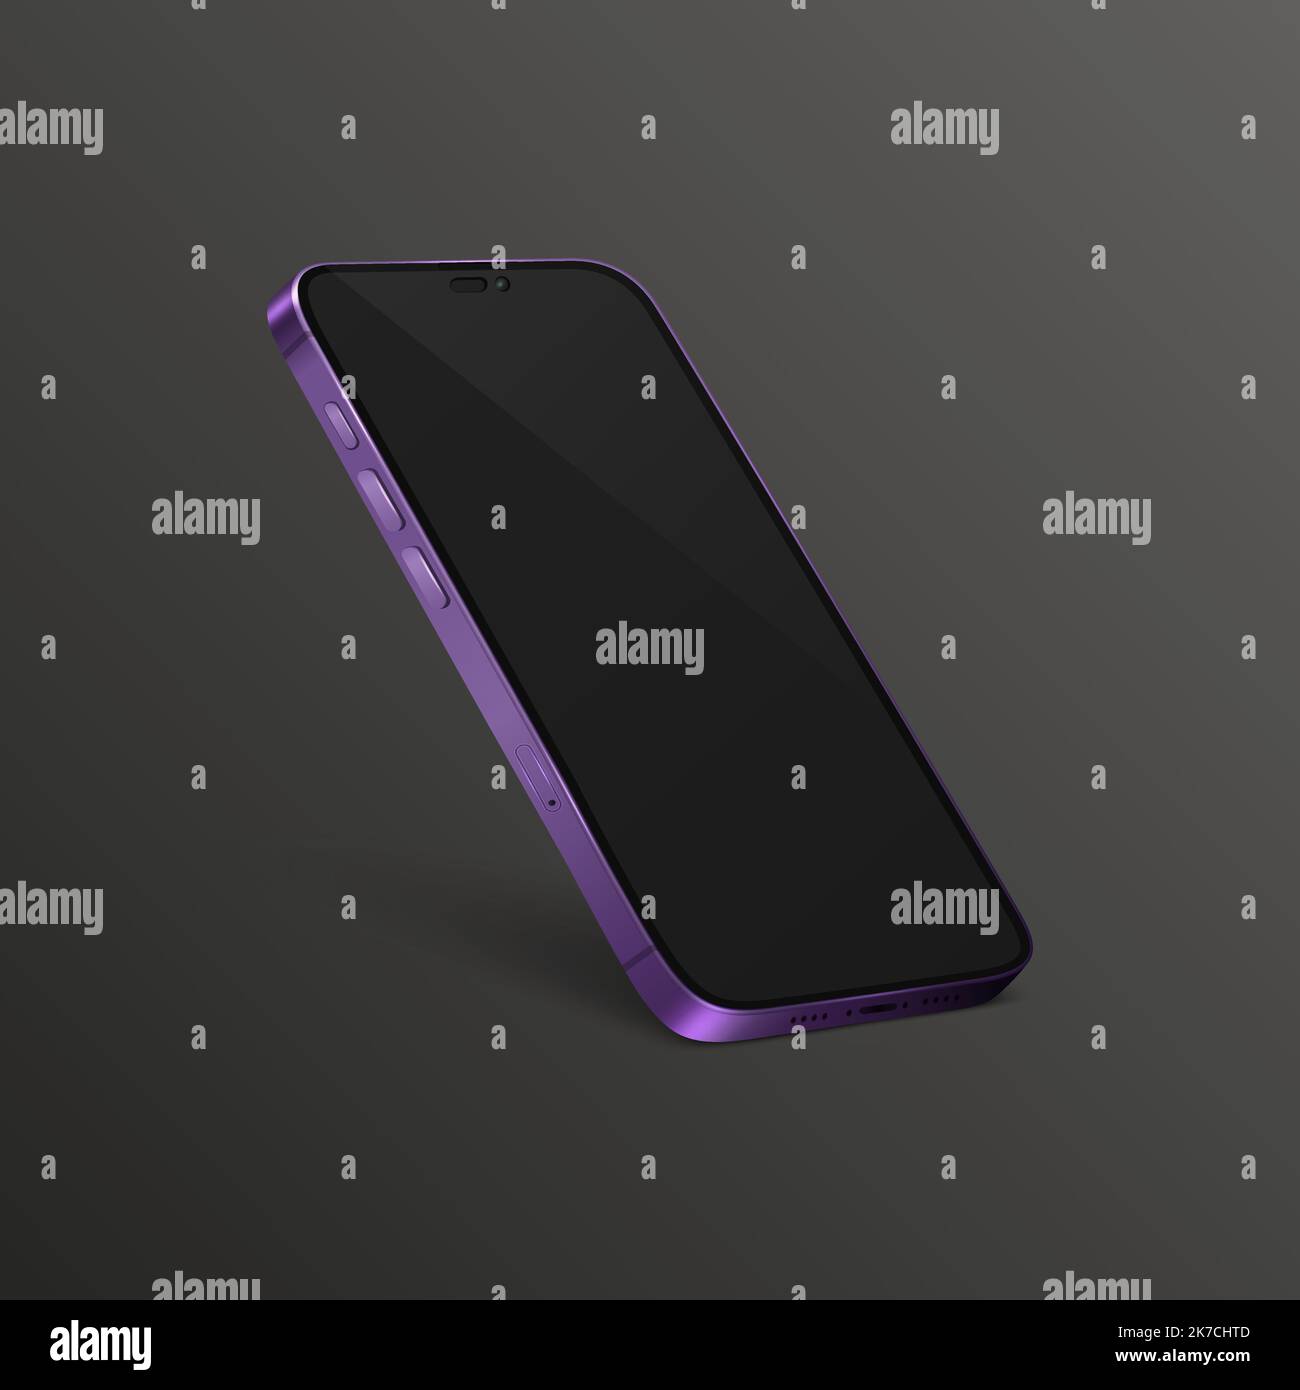 Vector 3d Realistic Purple Modern Smartphone Design Template with Black Screen. Mobile Phone Isolated. Telephone Device UI UX, Phone in Half Turn View Stock Vector